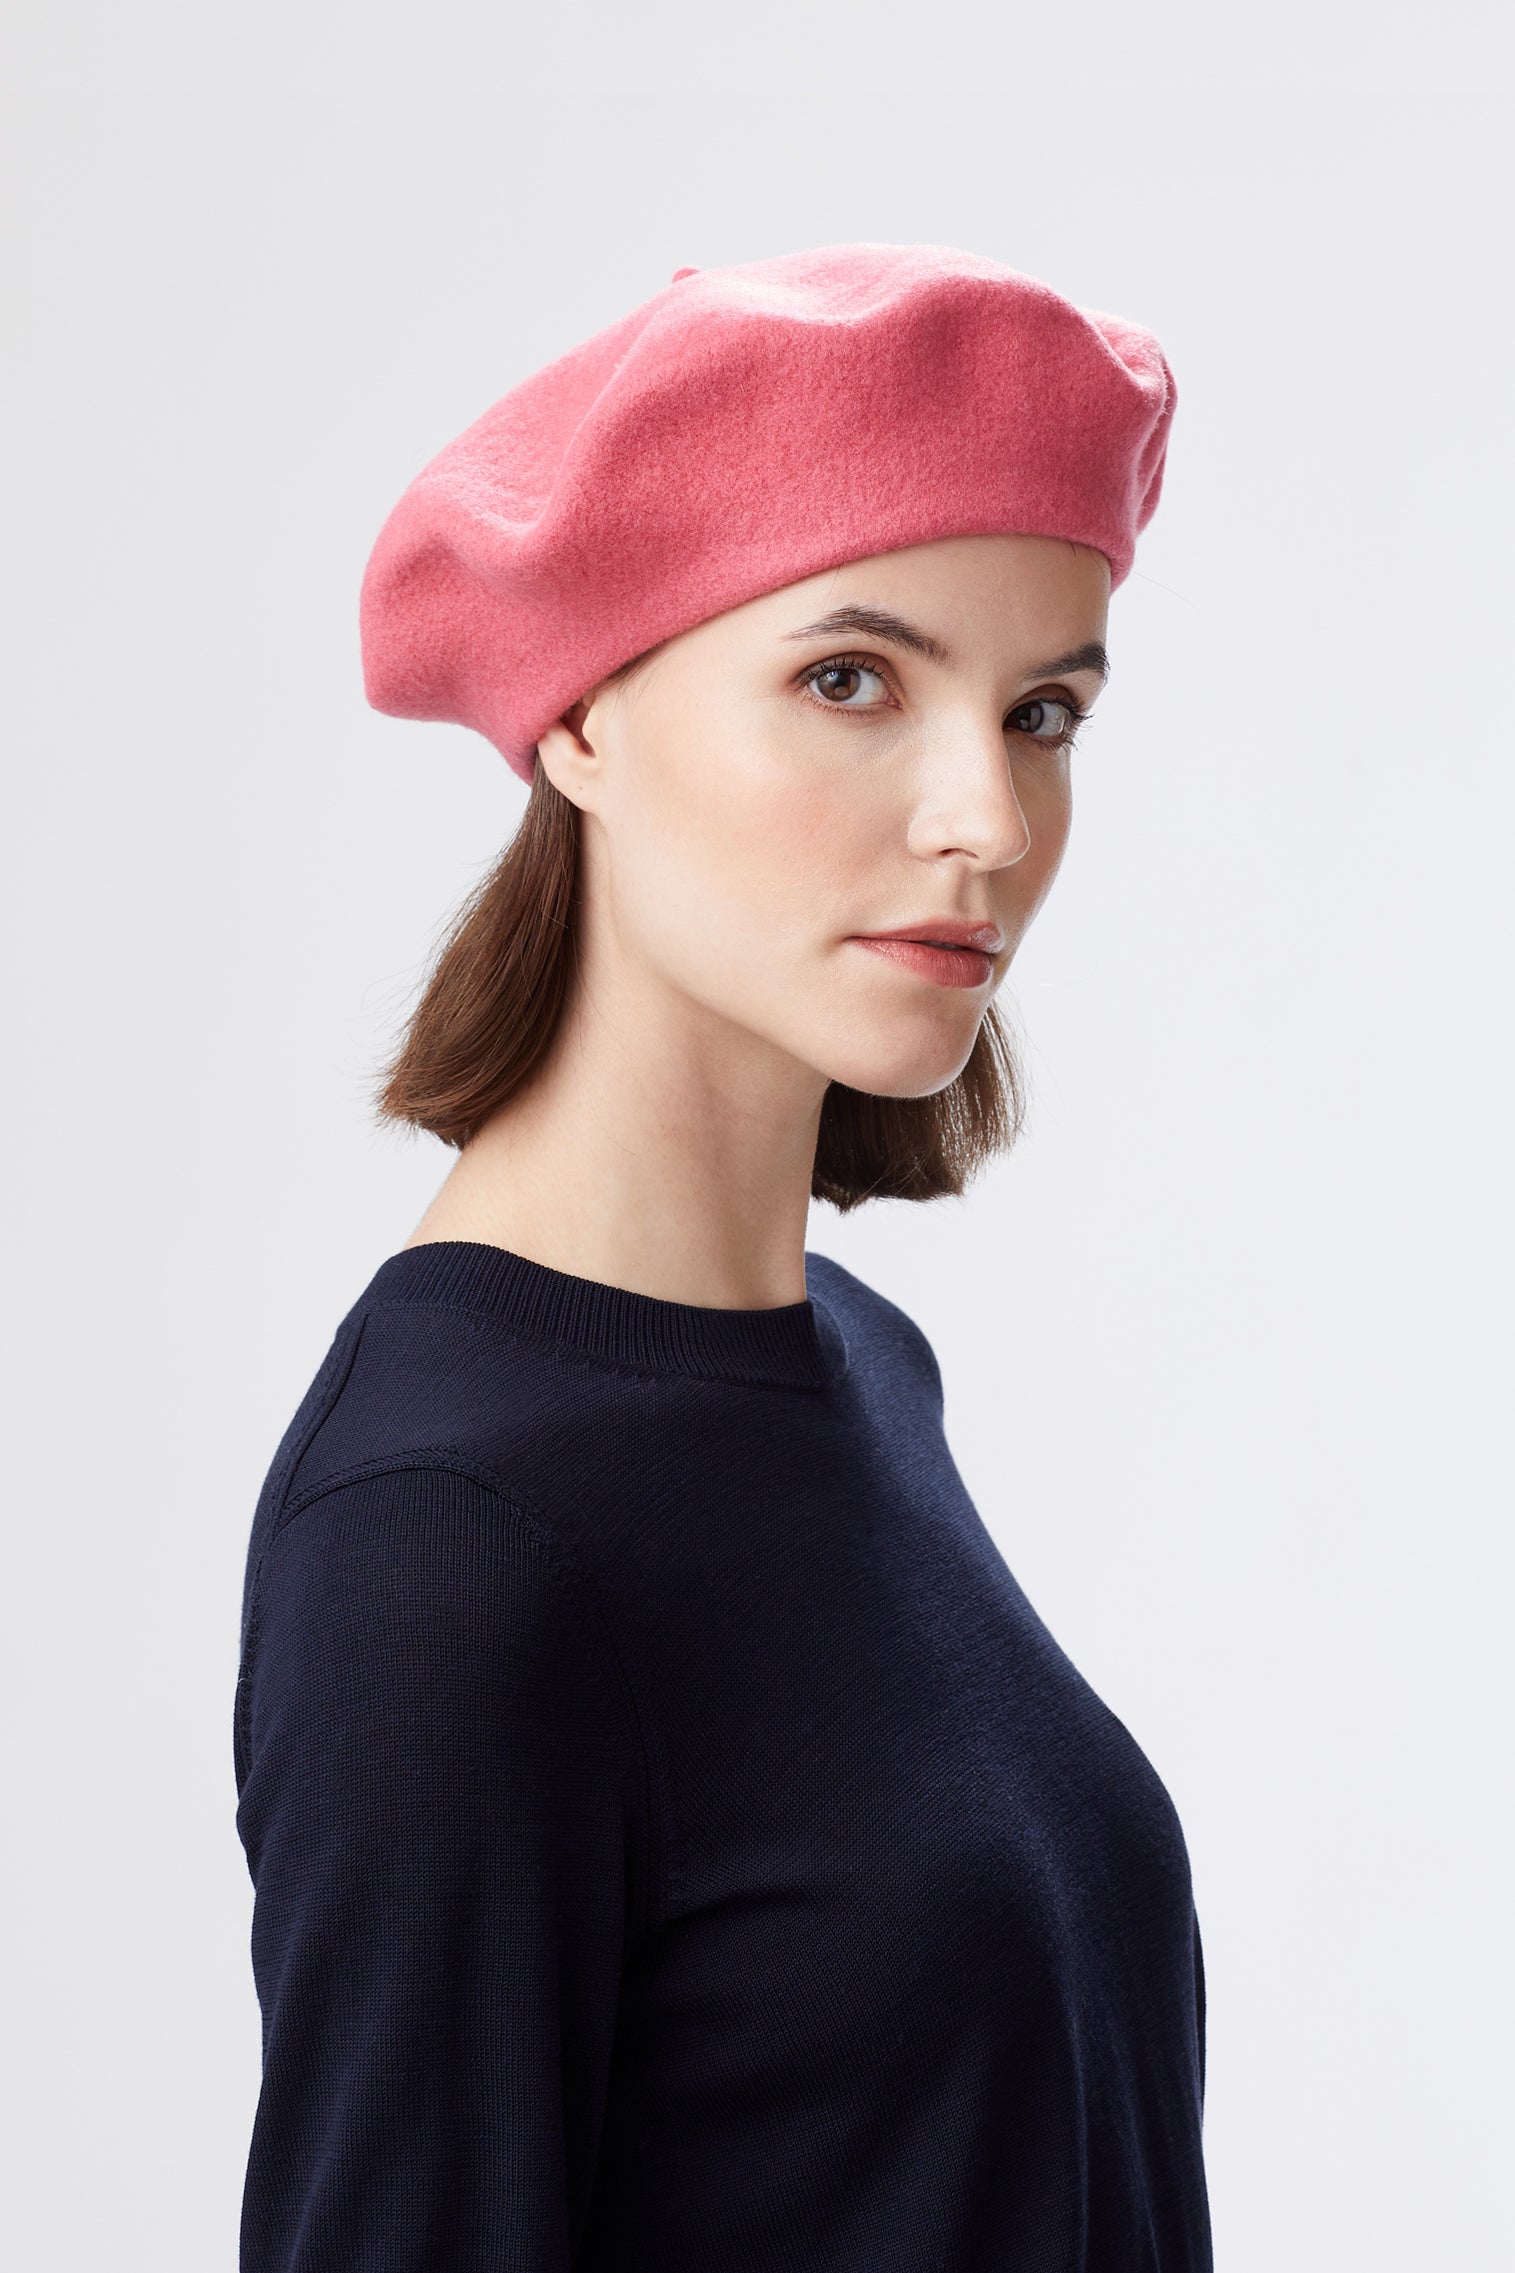 French Beret - You May Also Like - Lock & Co. Hatters London UK